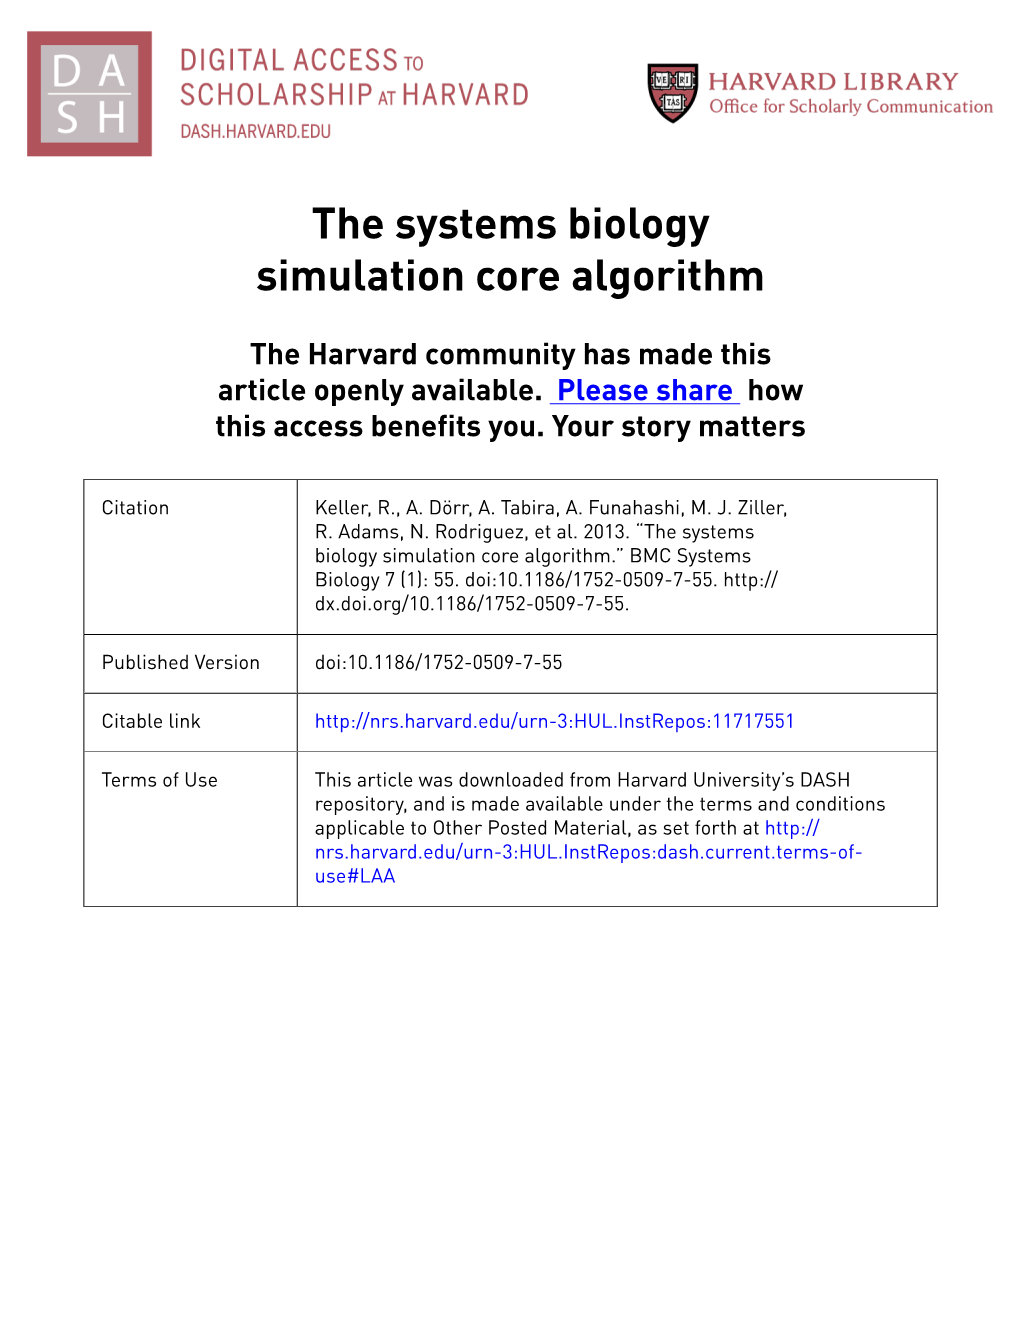 The Systems Biology Simulation Core Algorithm